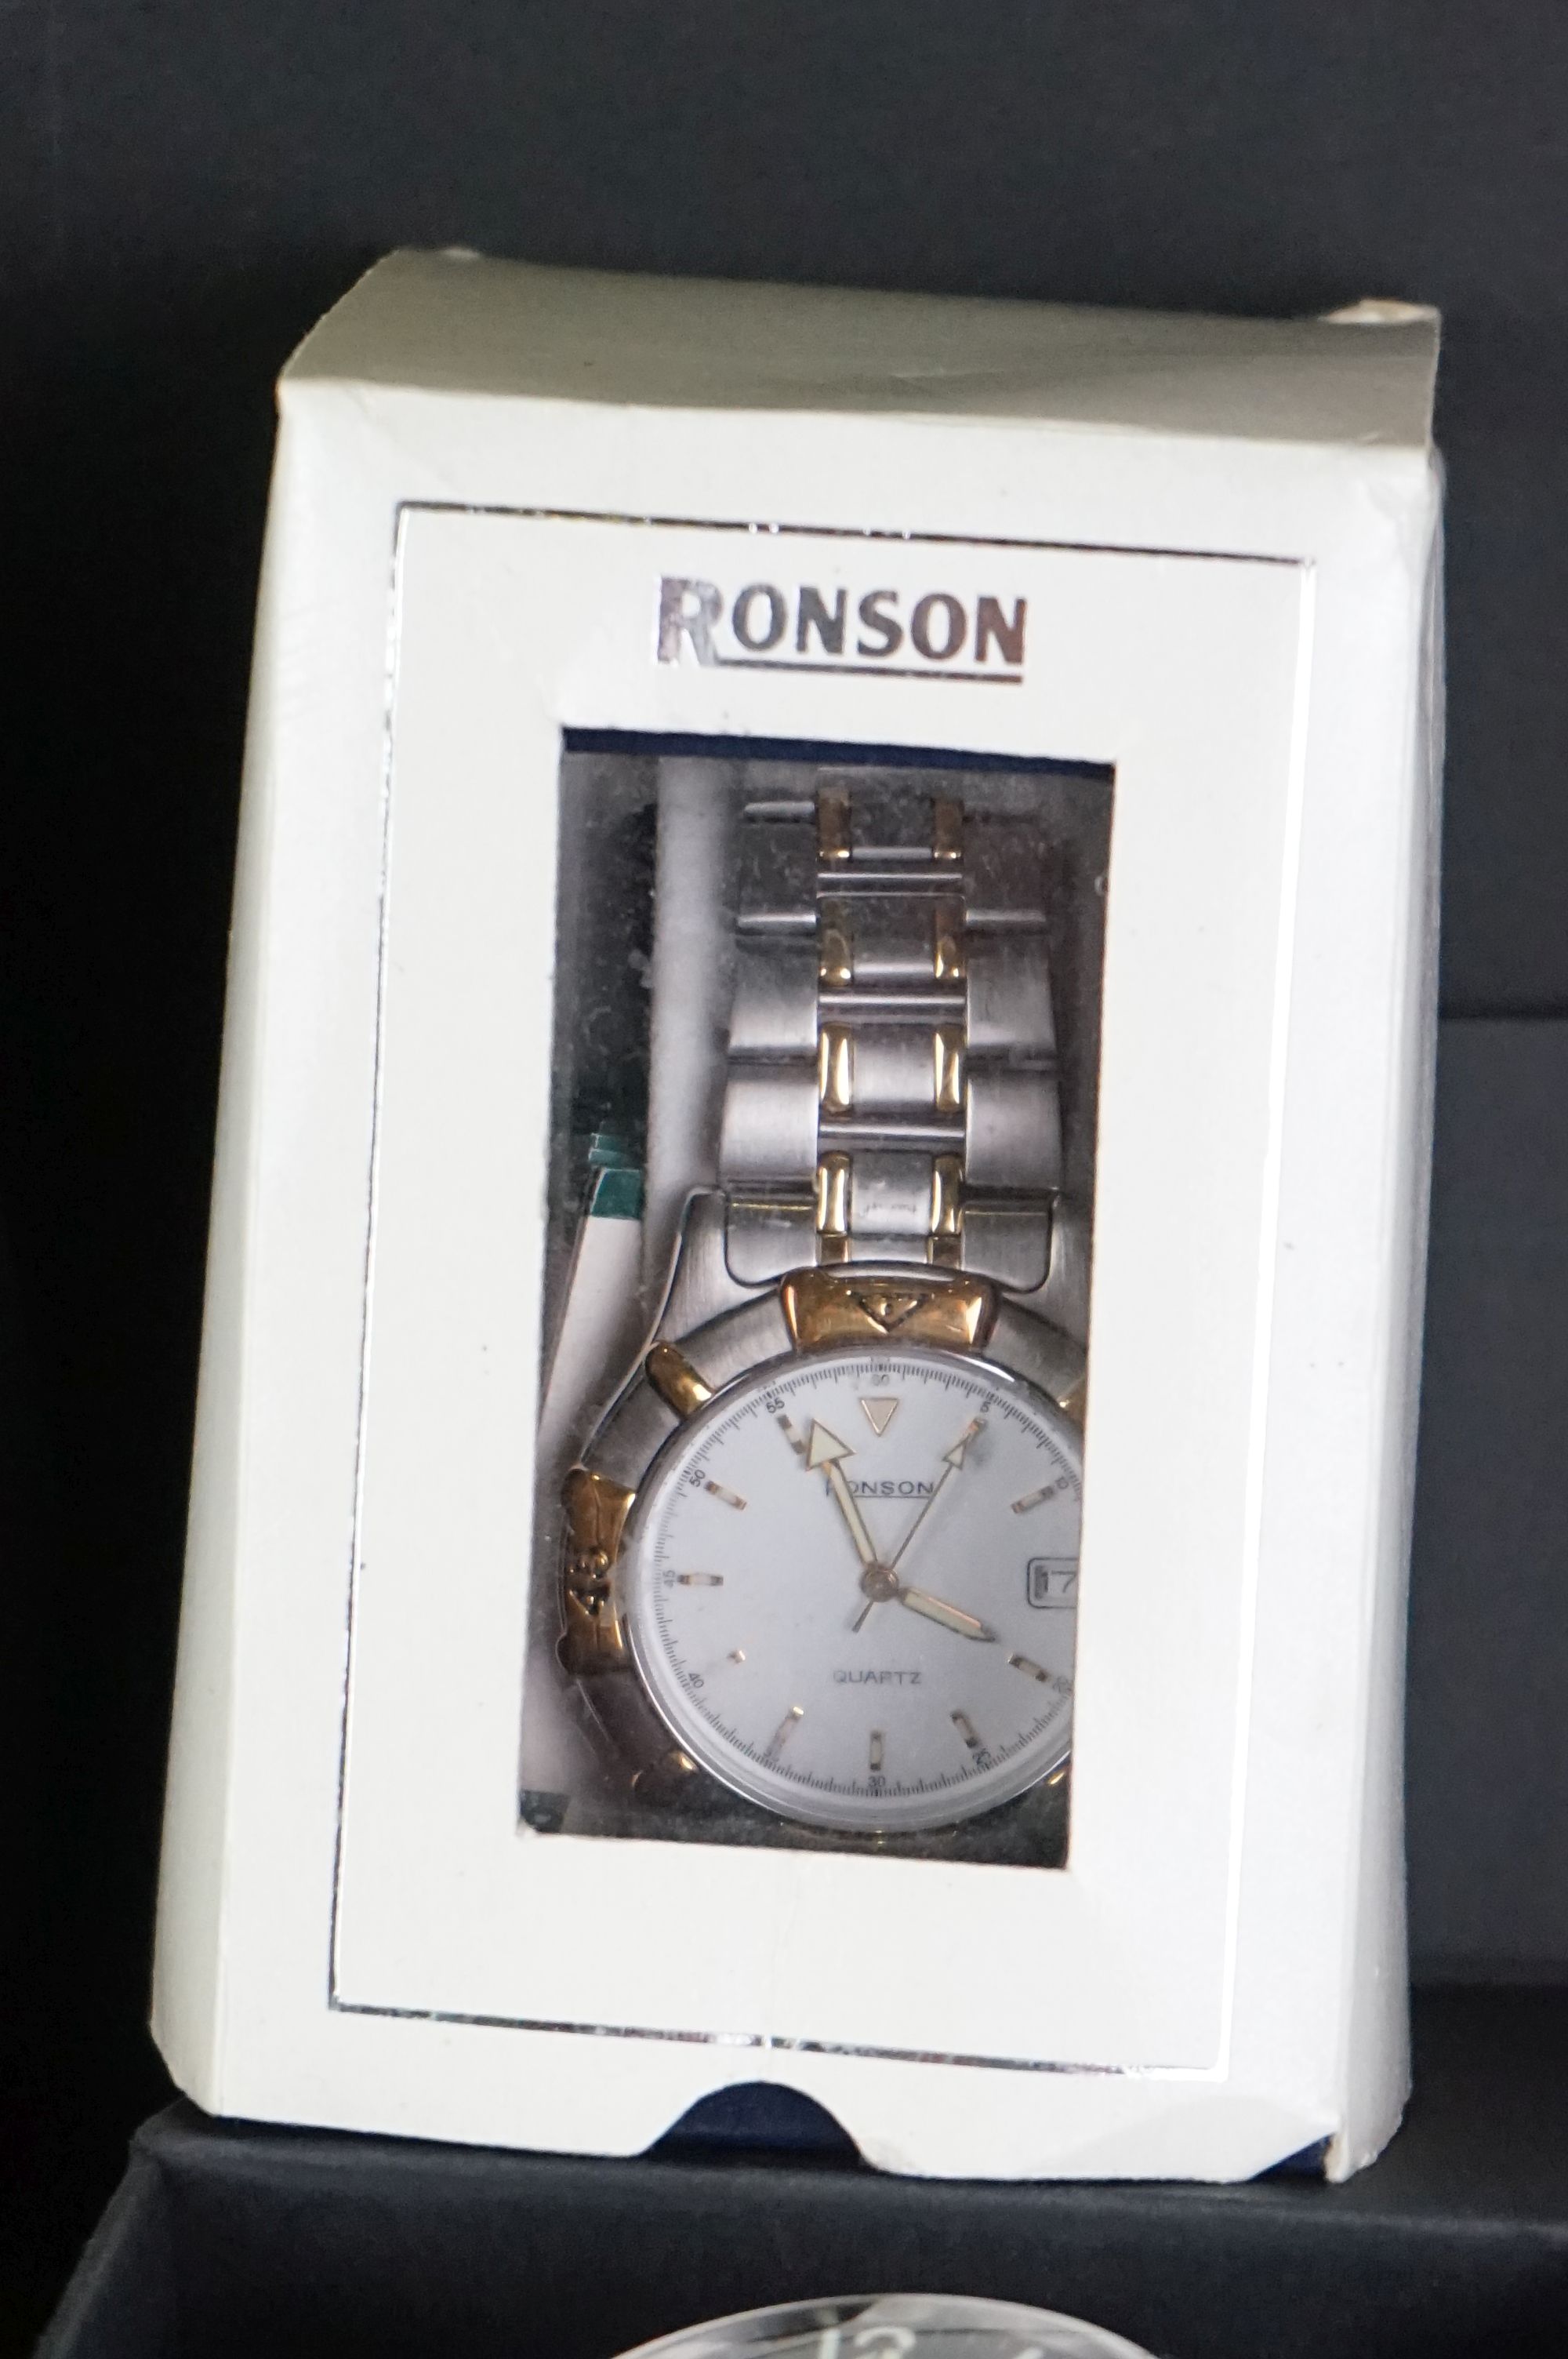 Assorted watches to include Identity, Ben Sherman, Rotary, World Time, Chronographs, etc - Image 8 of 9